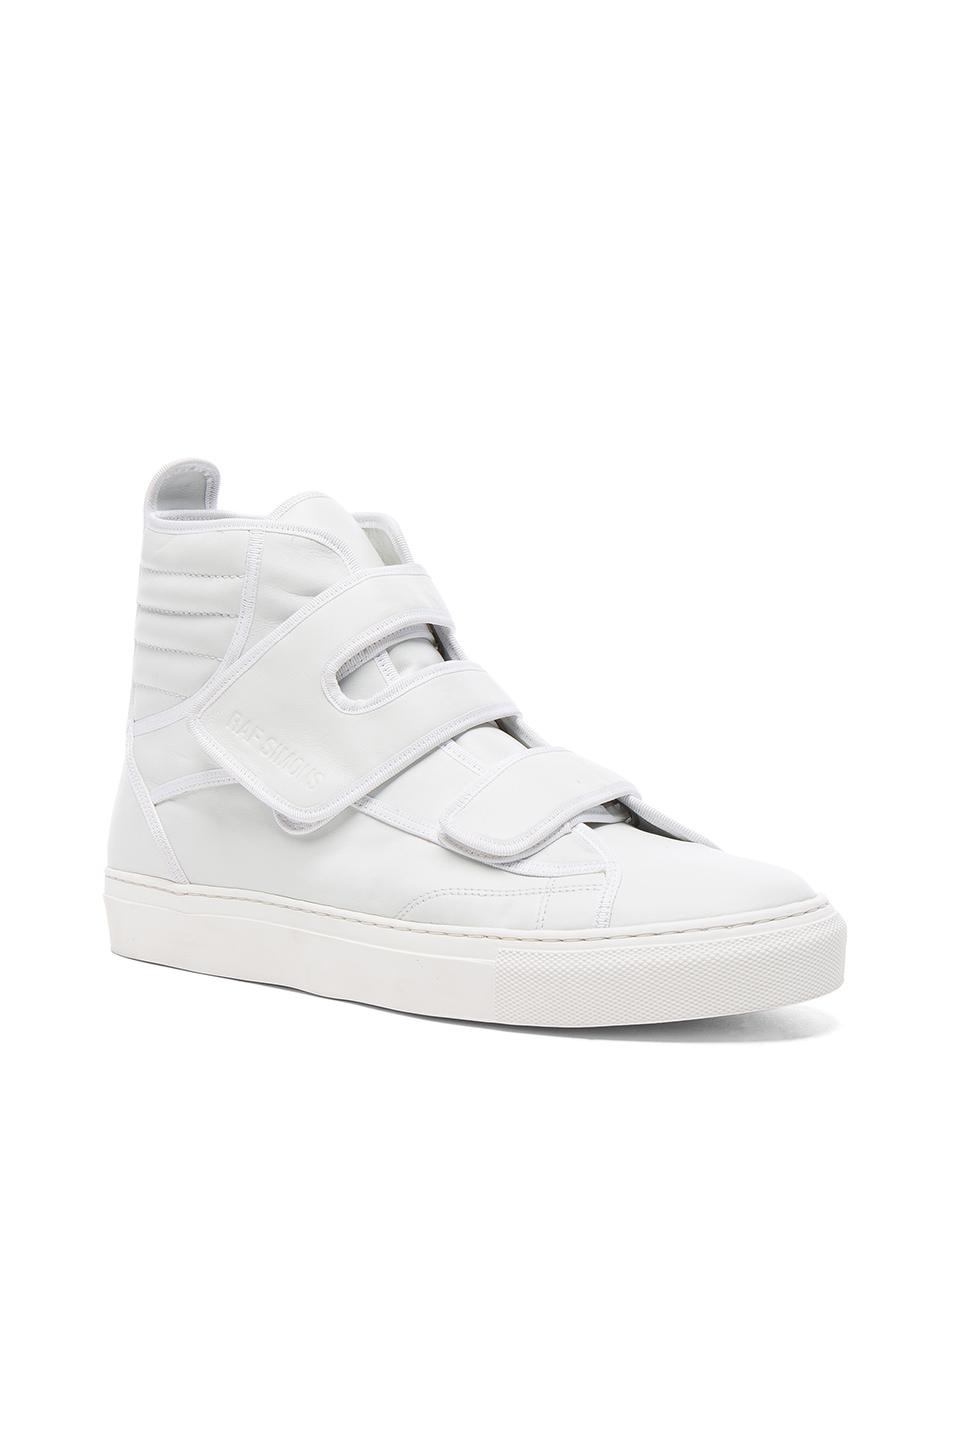 Lyst - Raf Simons High Top Velcro Sneakers in White